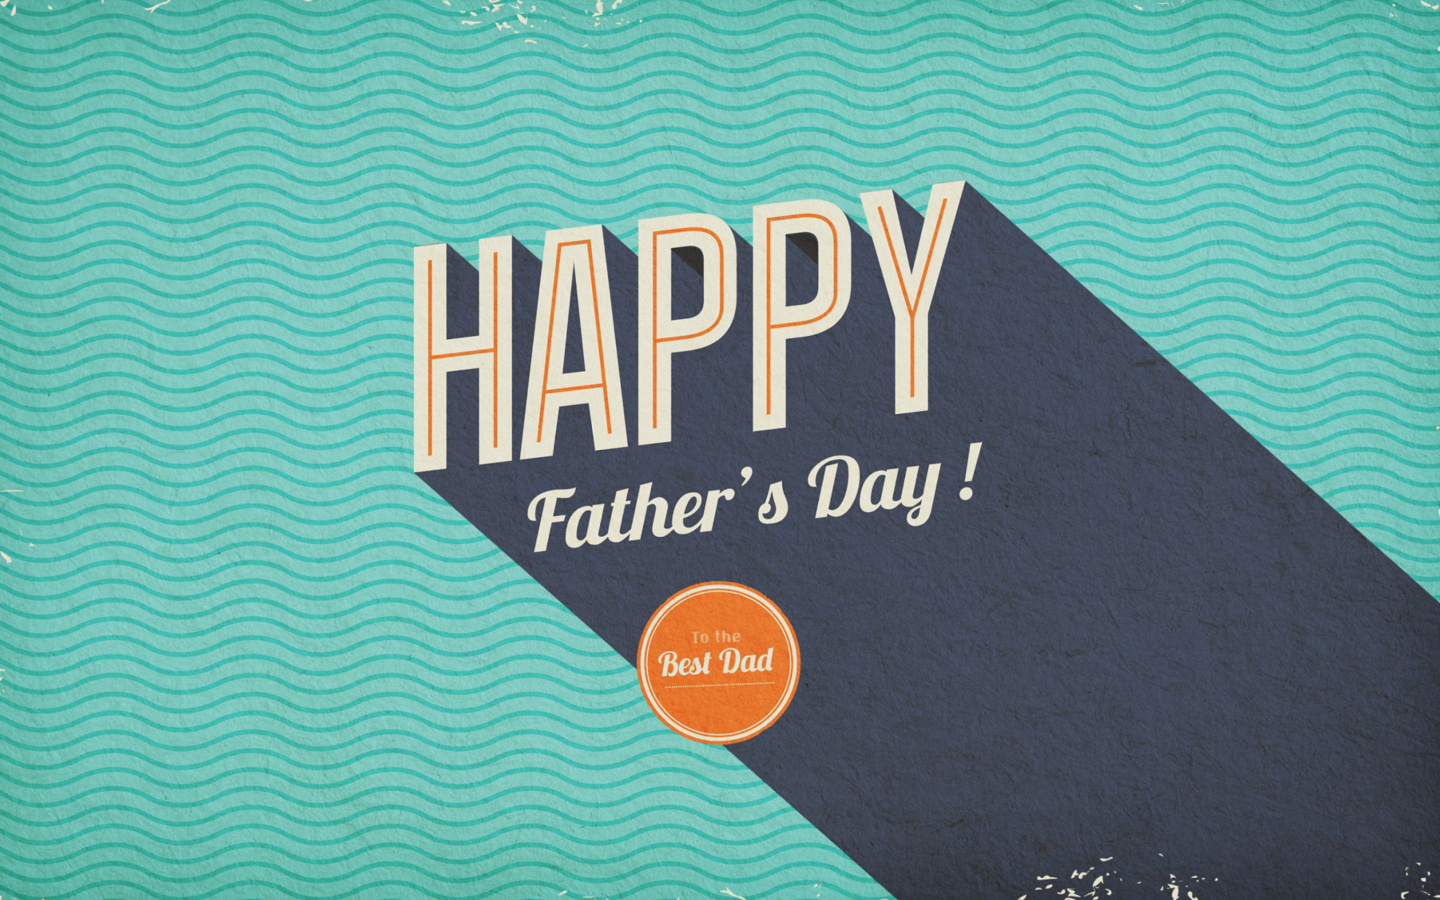 Happy Fathers Day wallpaper 1440x900